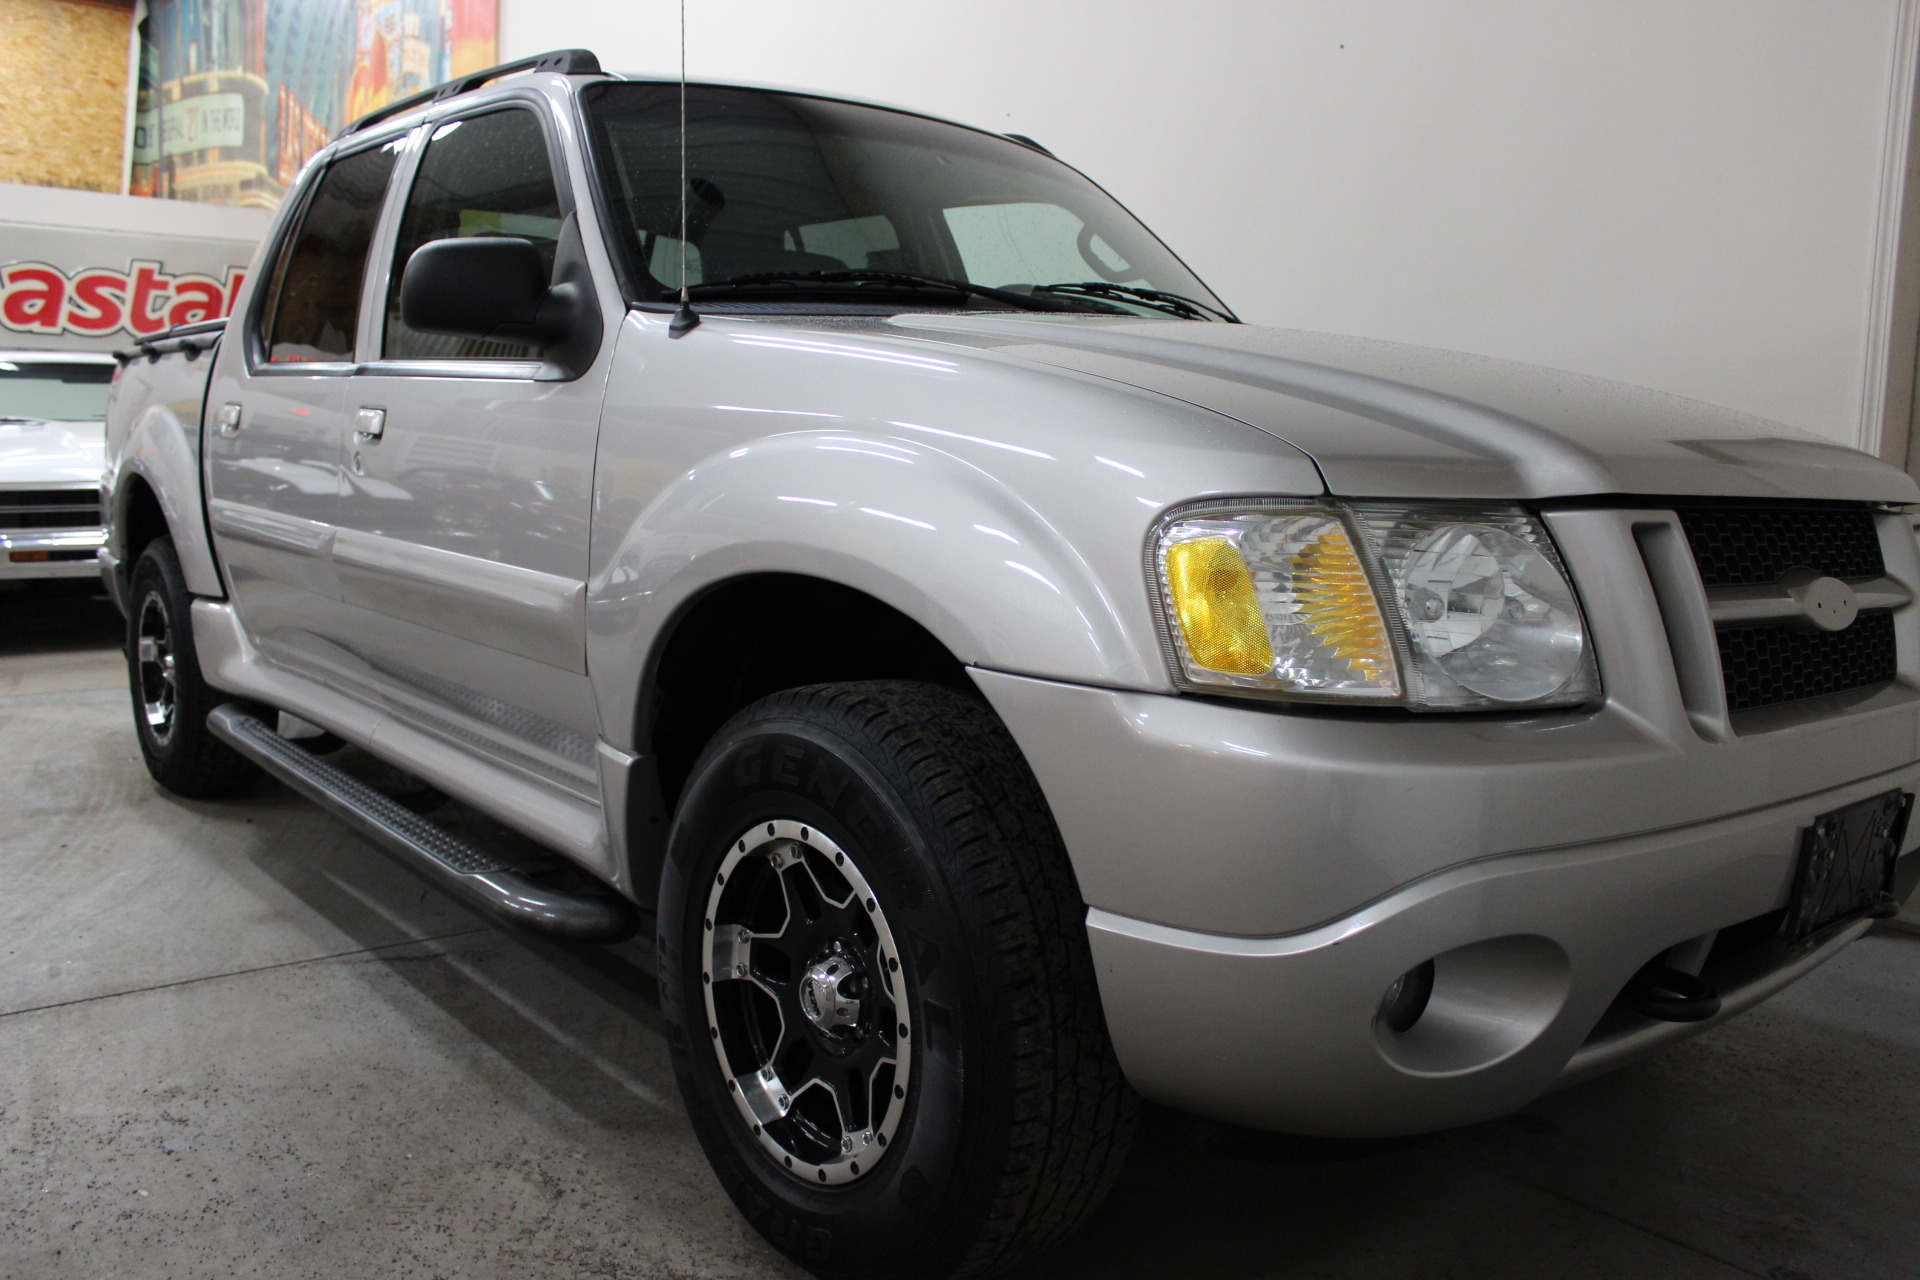 2005 Ford Explorer Sport Trac XLT - Biscayne Auto Sales | Pre-owned Dealership | Ontario, NY Tire Size For 2005 Ford Explorer Sport Trac